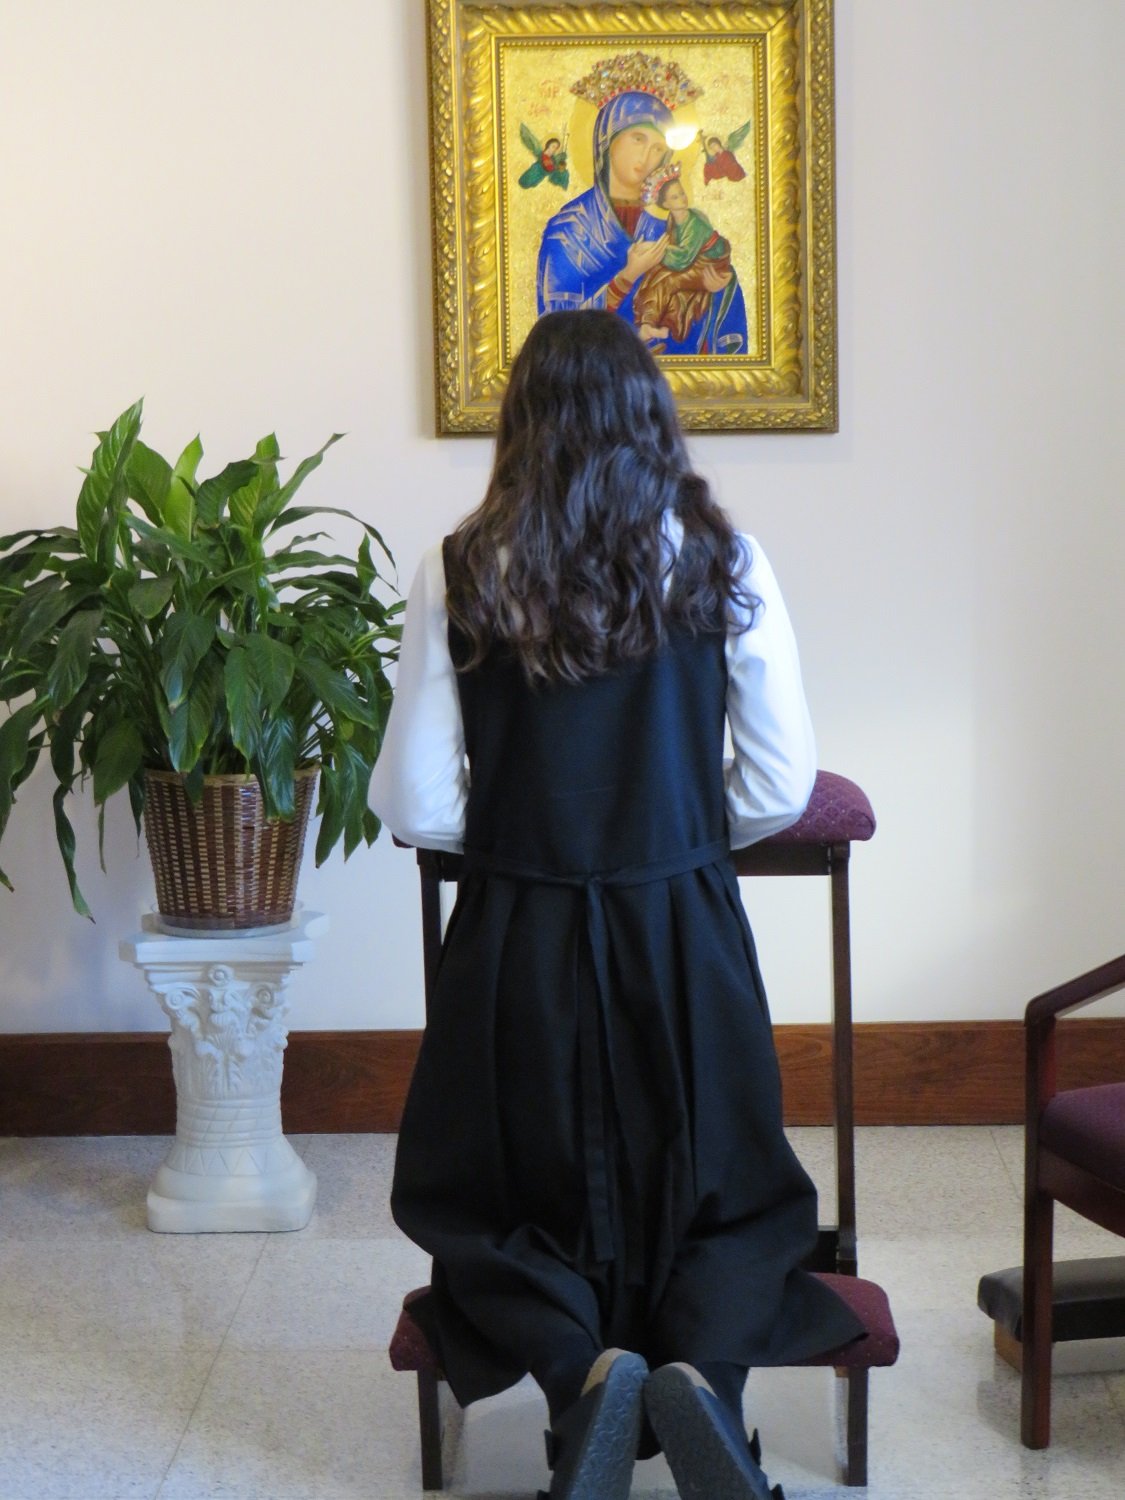  The novice-to-be, kneeling in prayer before the Vestition ceremony begins 